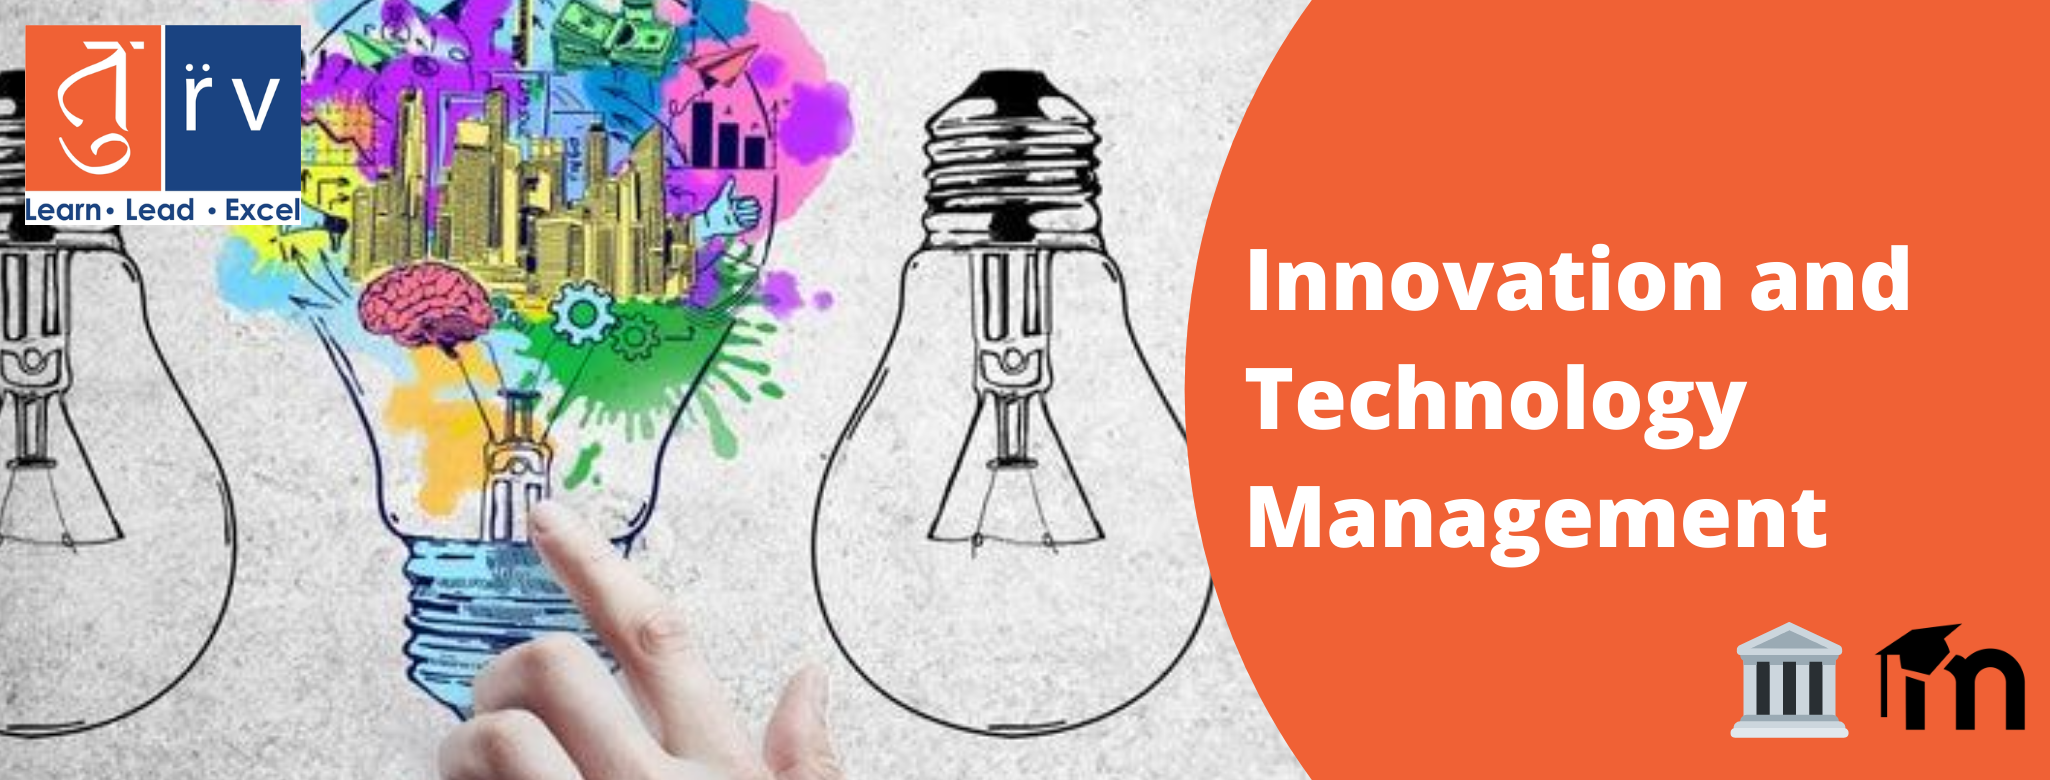 Innovation and Technology Management